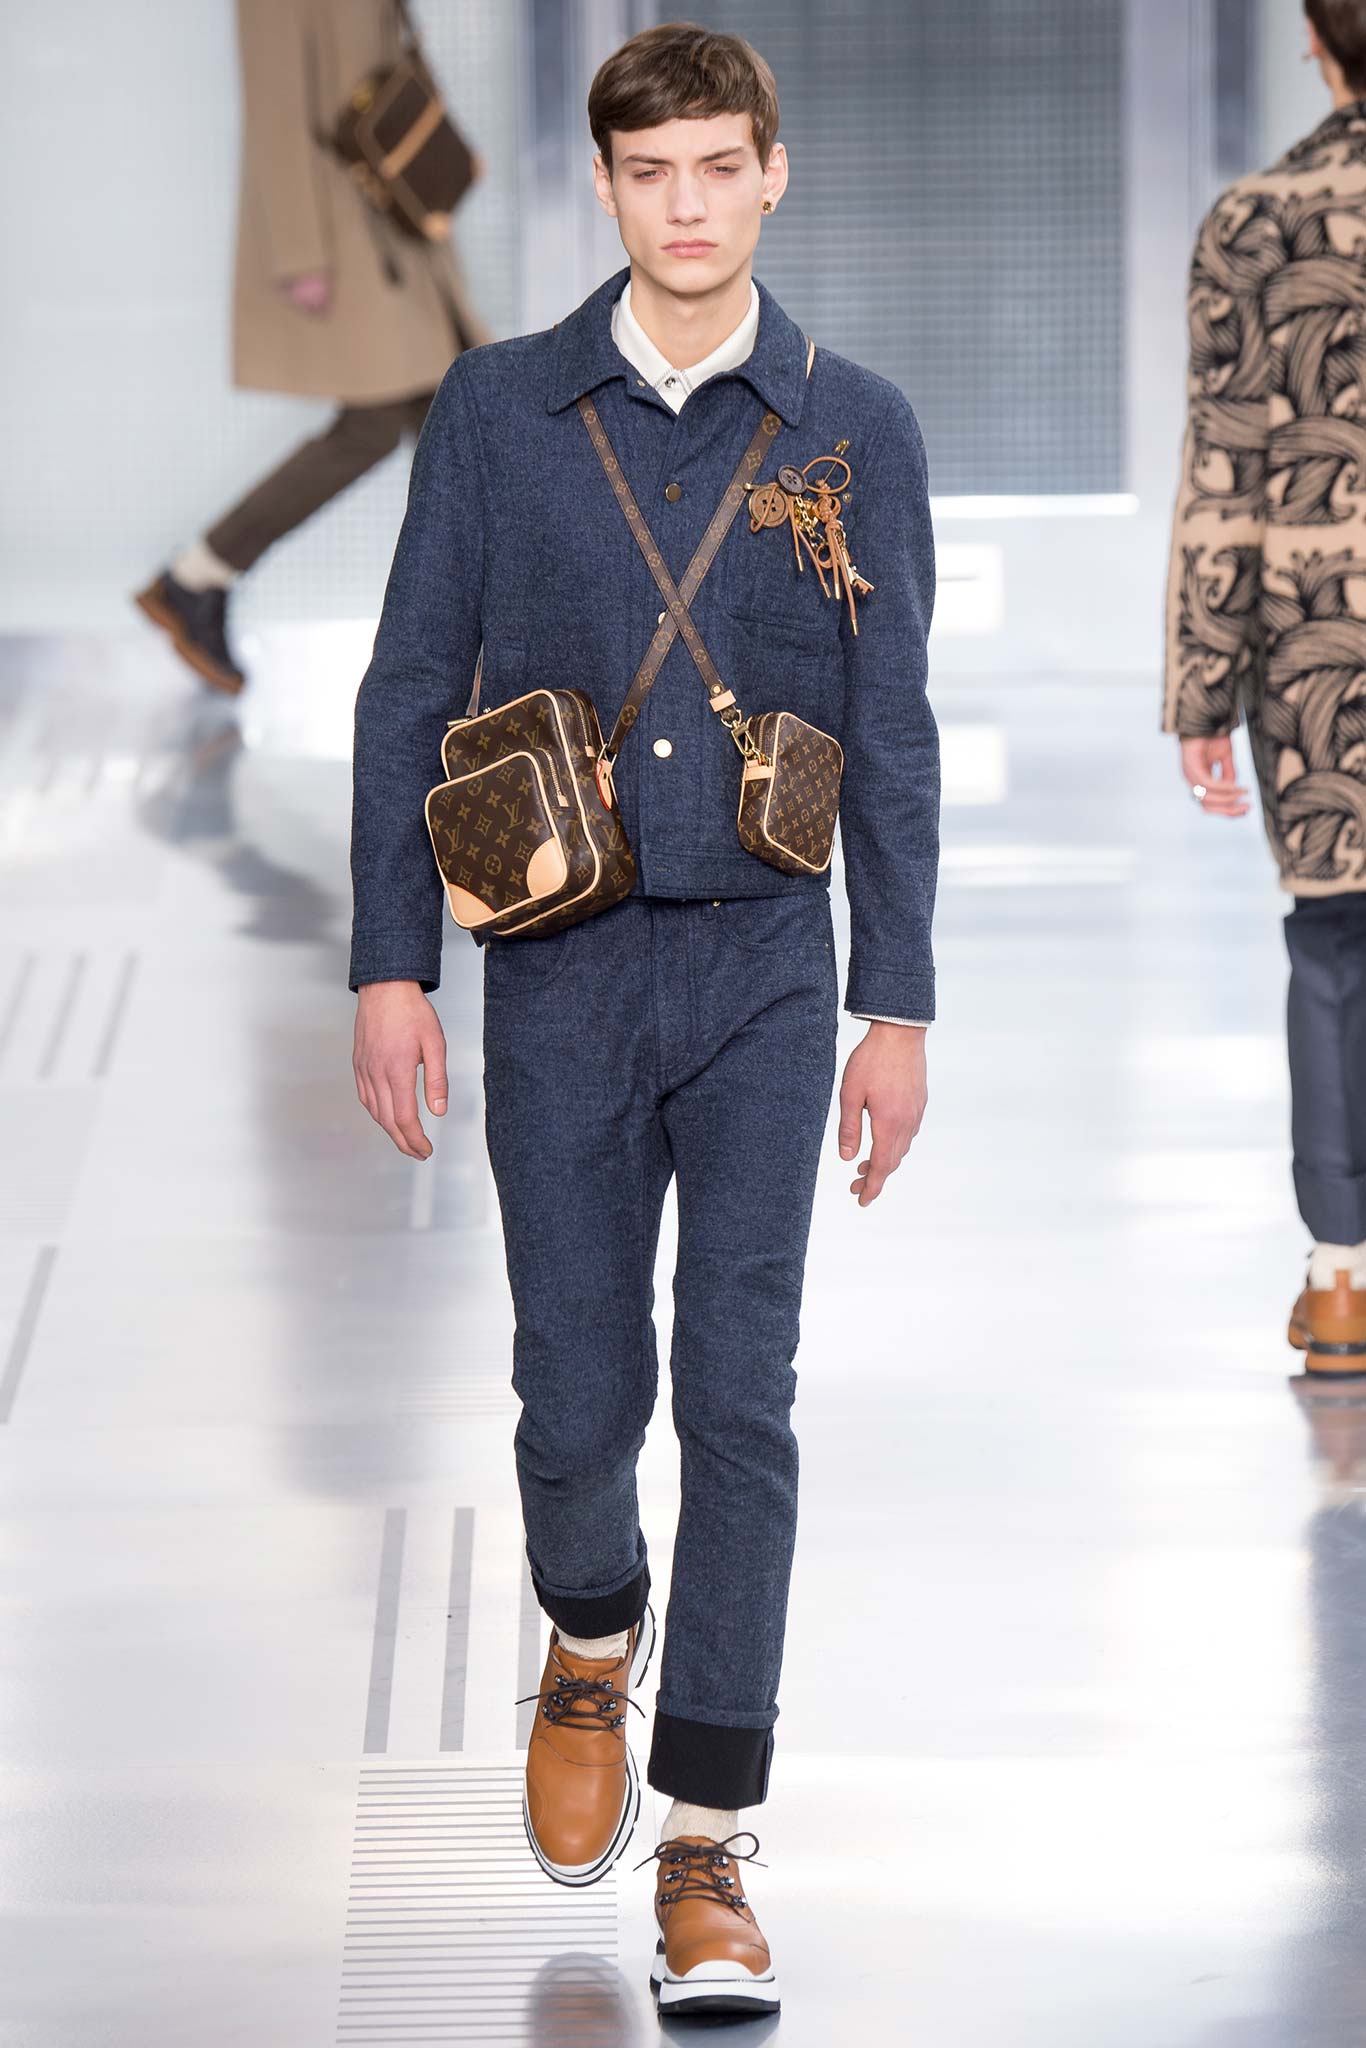 Louis Vuitton Nemeth Fall / Winter 2015 Bag Collection - Spotted Fashion